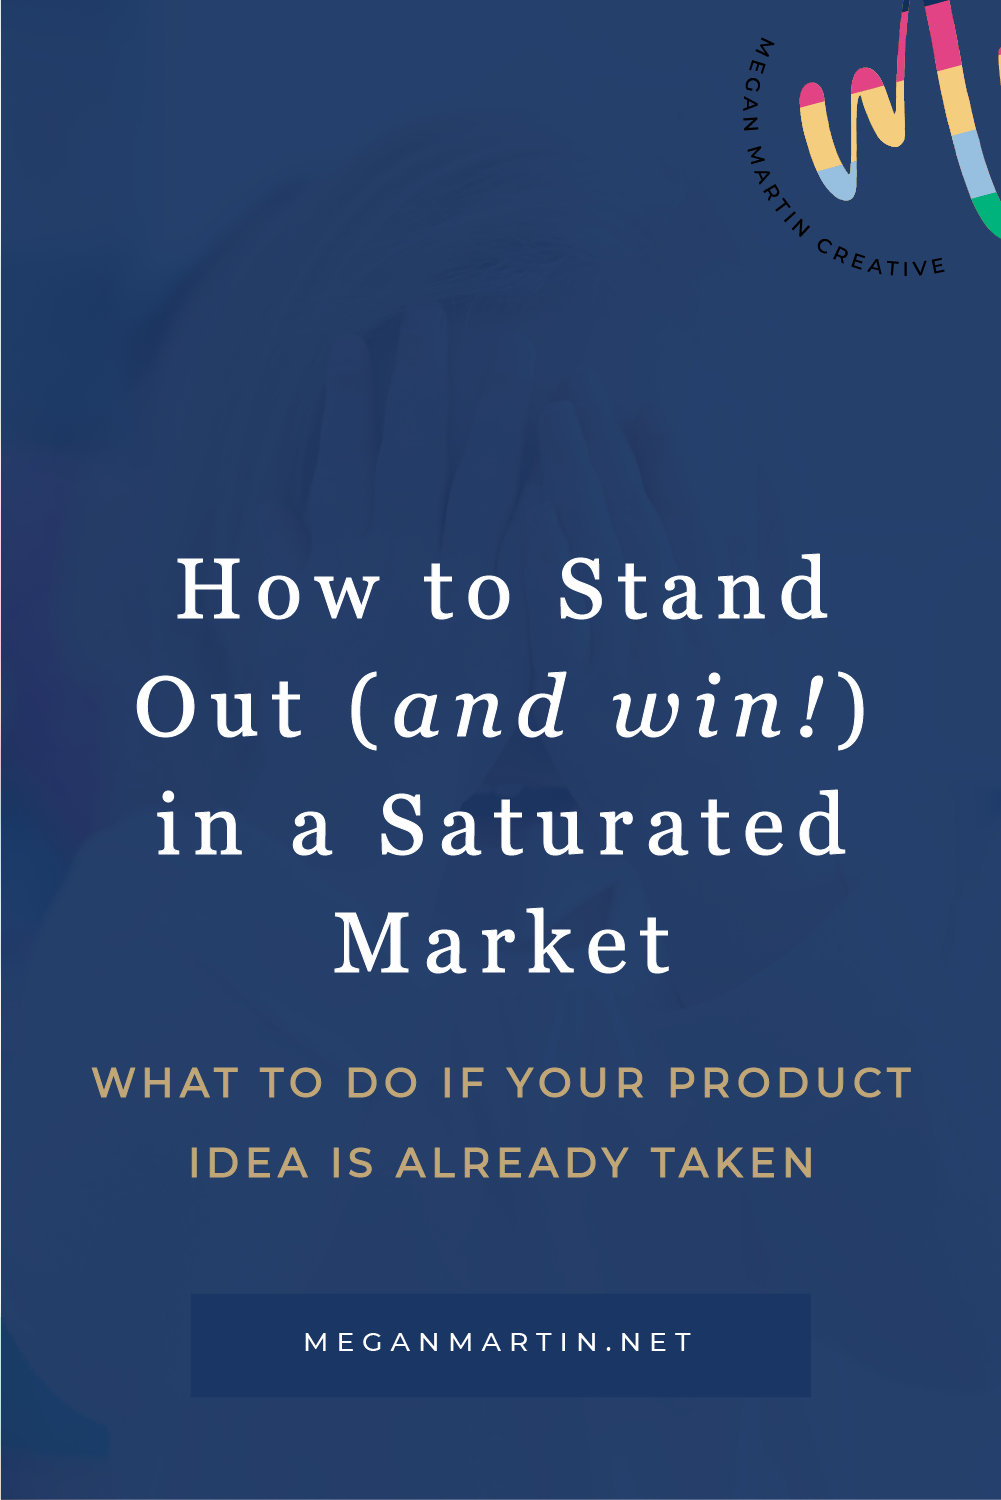 How to stand out and sell your digital products even if someone else is already selling it